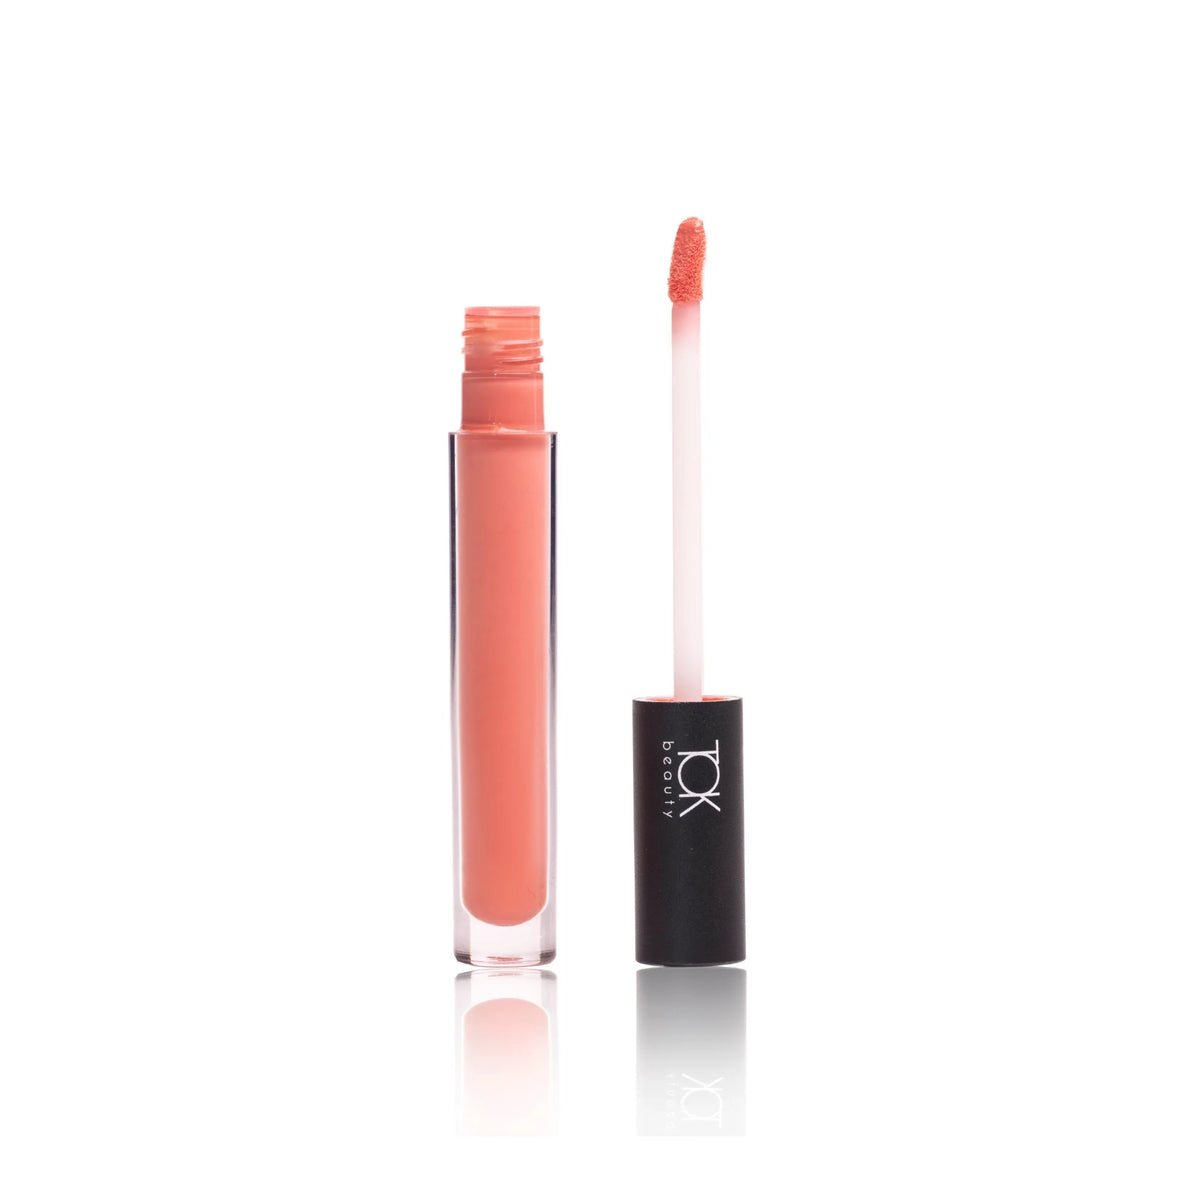 Tok beauty lip tonic in bloom pink color with wand showing